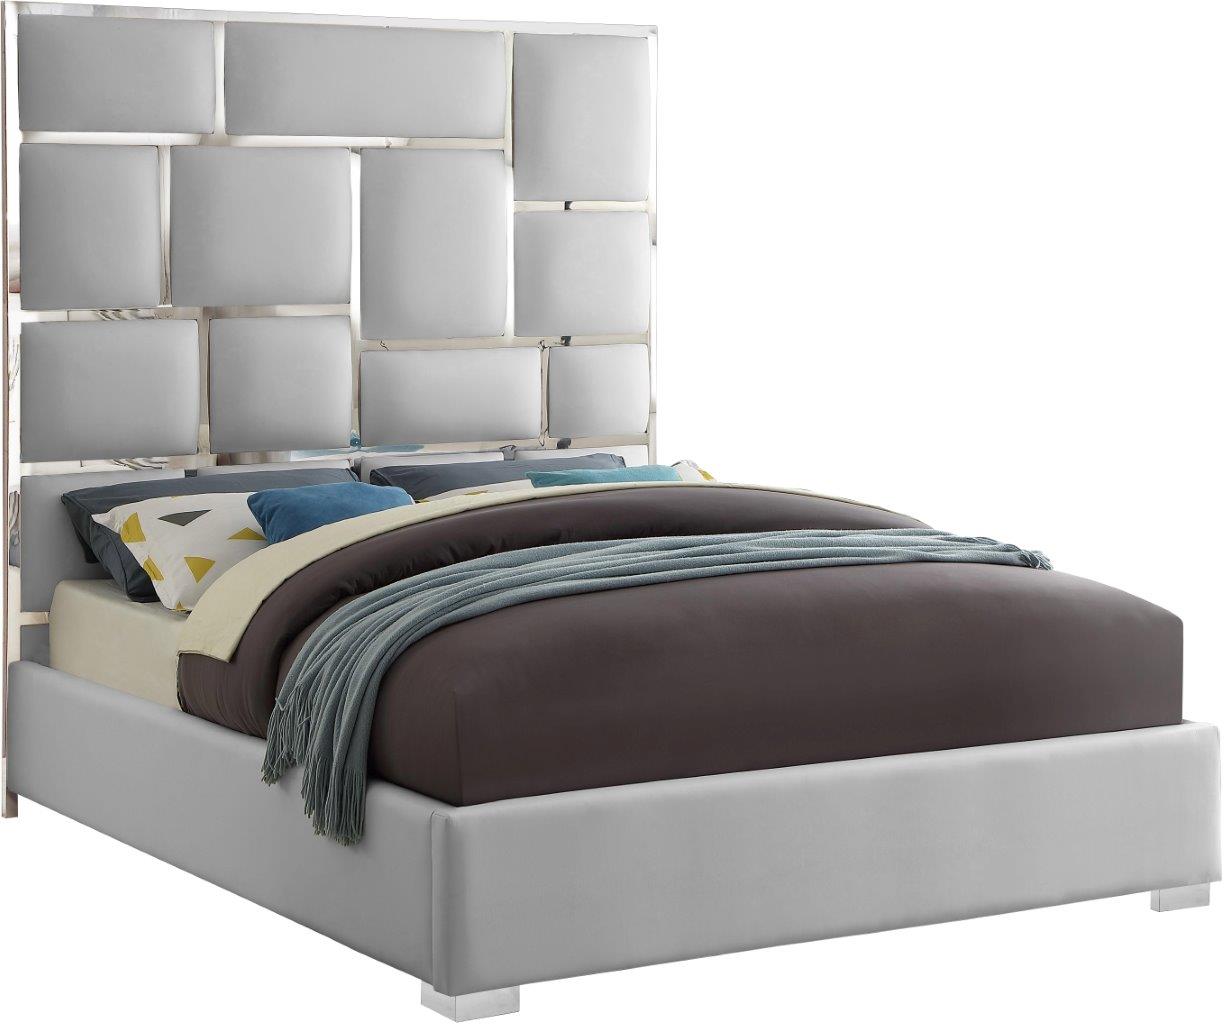 Milan White Faux Leather Queen Bed, White Leather Bed Queen